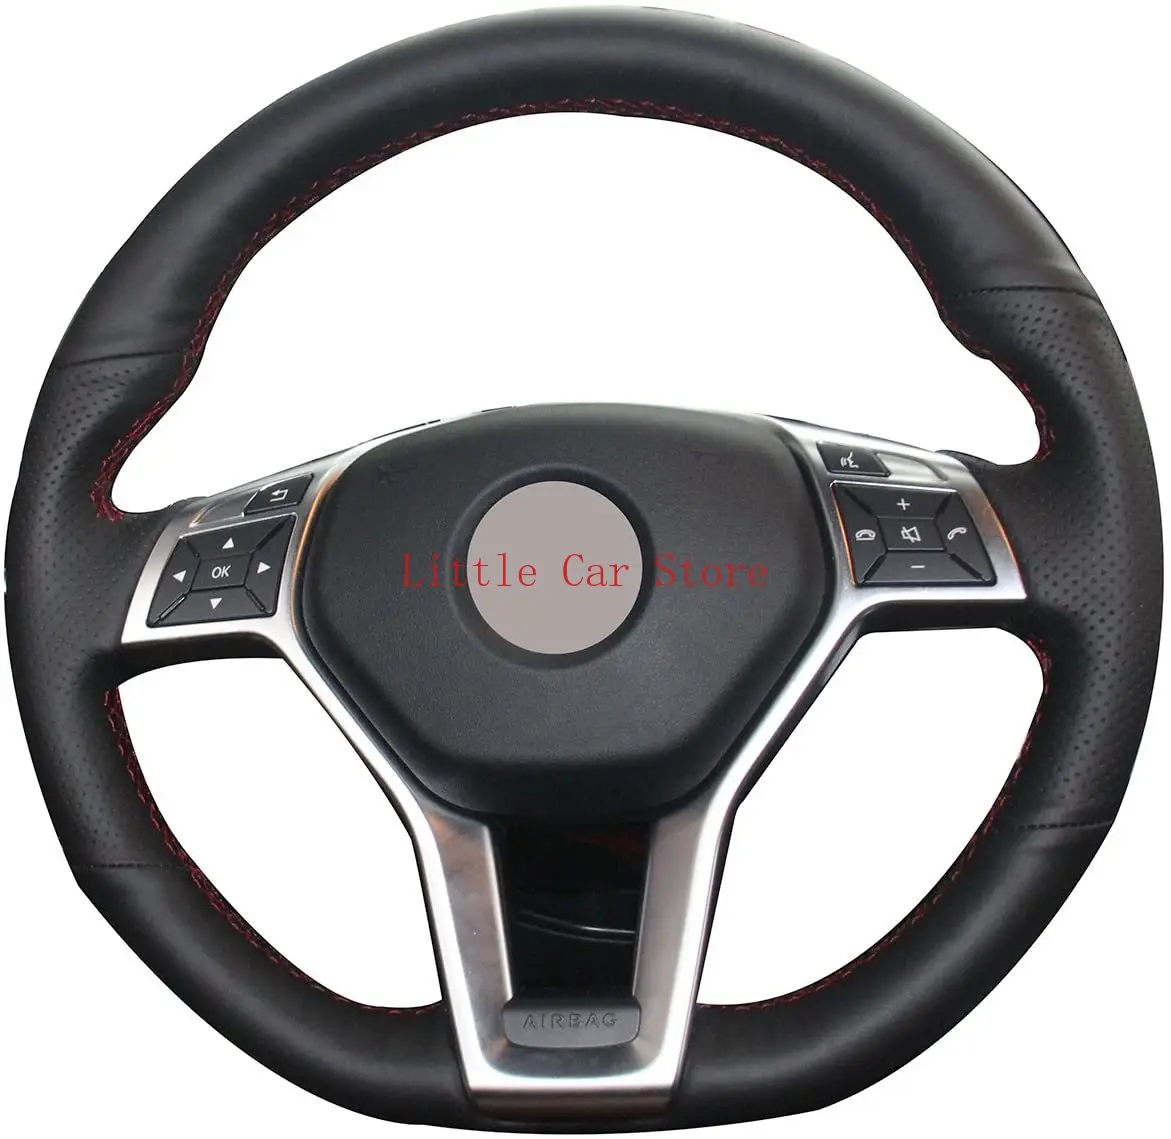 

Black Leather DIY Steering Wheel Cover For Benz C350 C250 C300 CLA250 CLS550 E250 E350 E400 GLA45 AMG SL550 SLK250 SLK300 SLK350